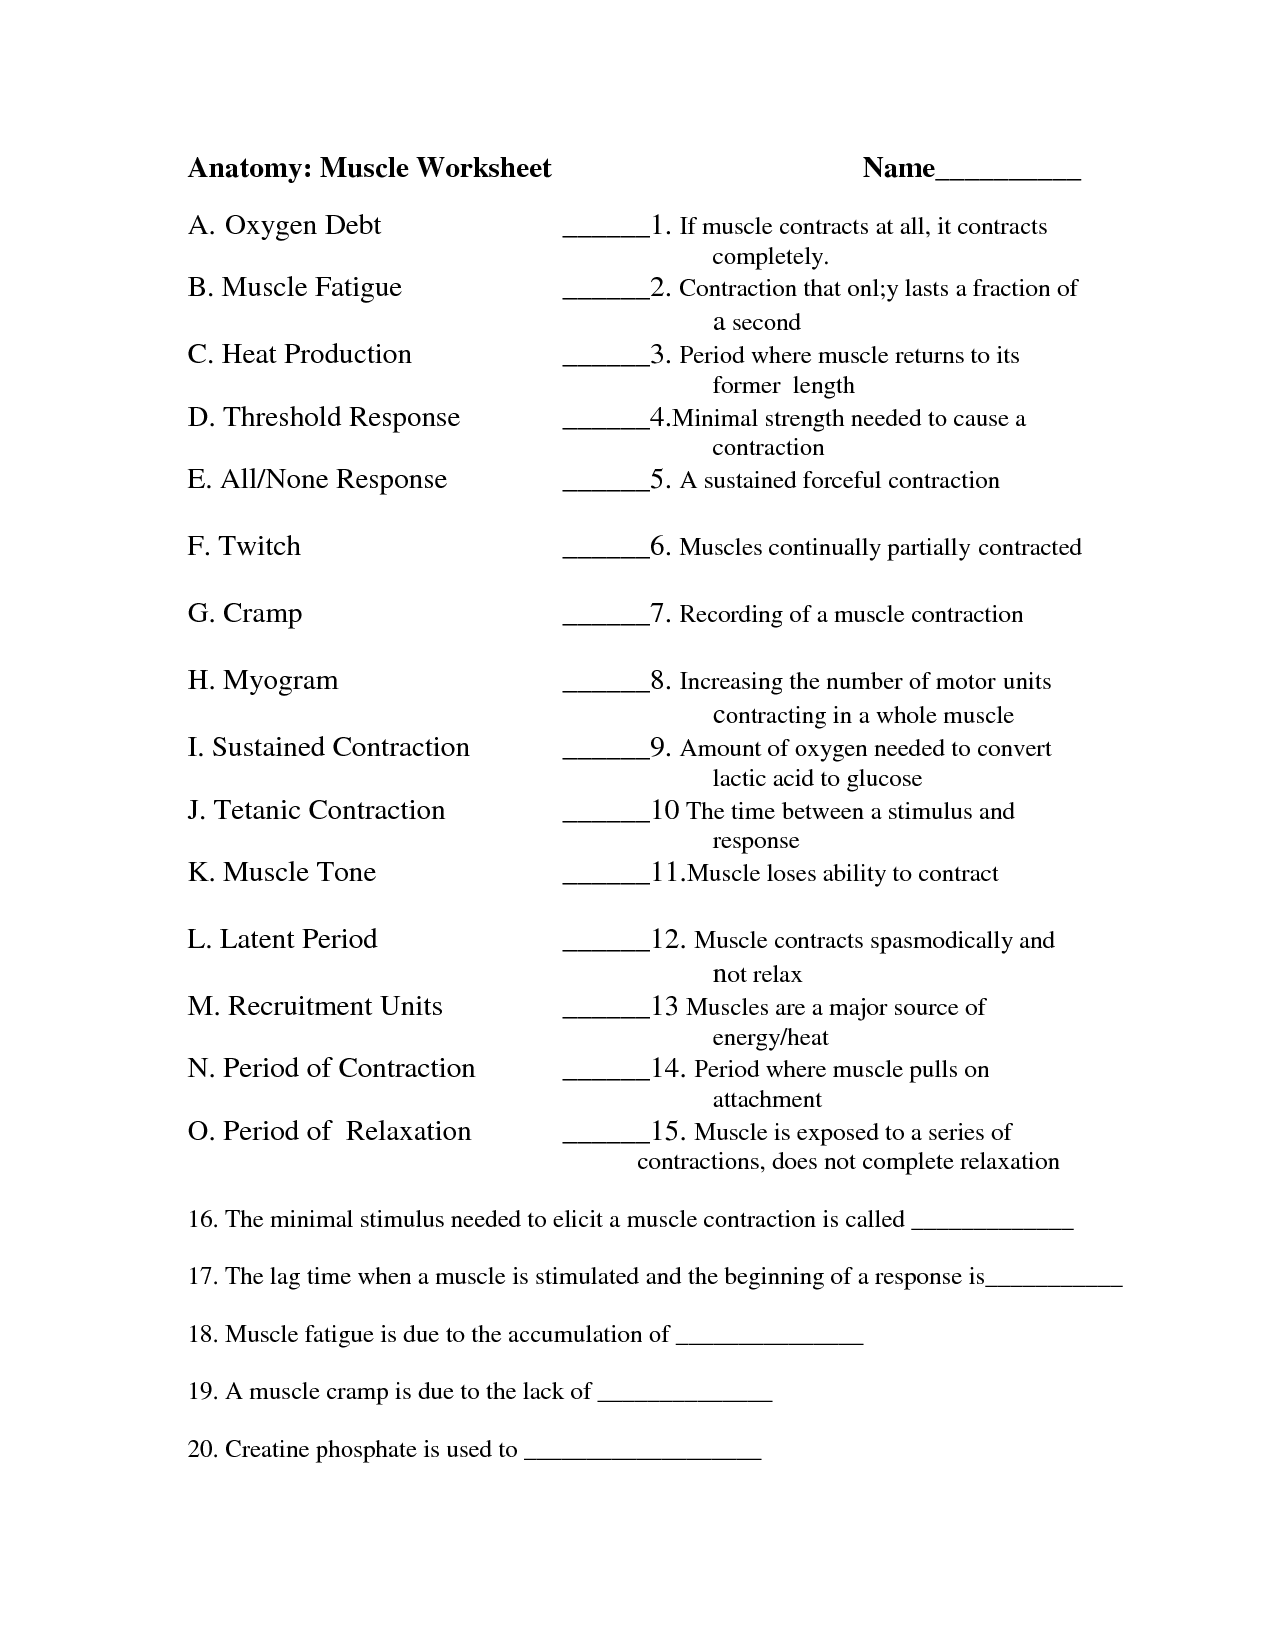 Anatomy And Physiology Muscle Worksheets Anatomy And Physiology Physiology Anatomy